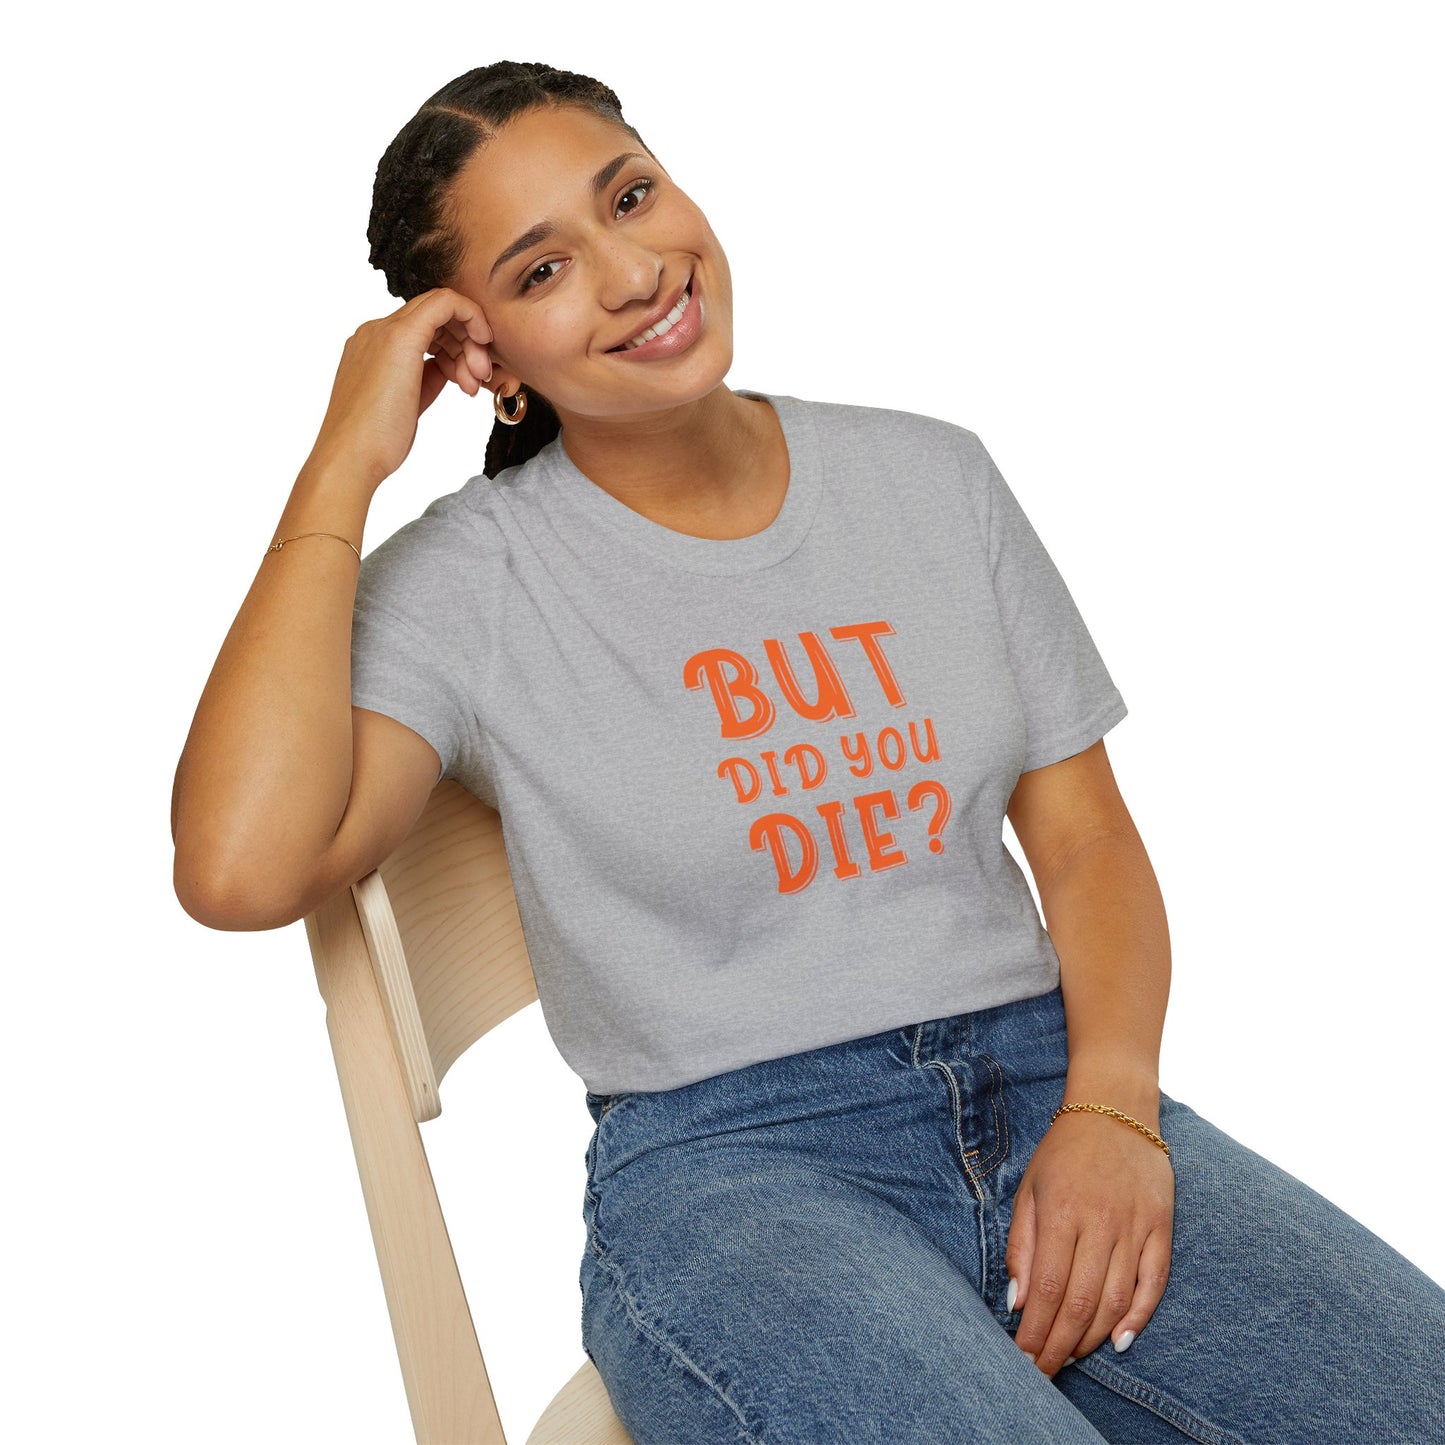 "But did you die?" Unisex Softstyle T-Shirt